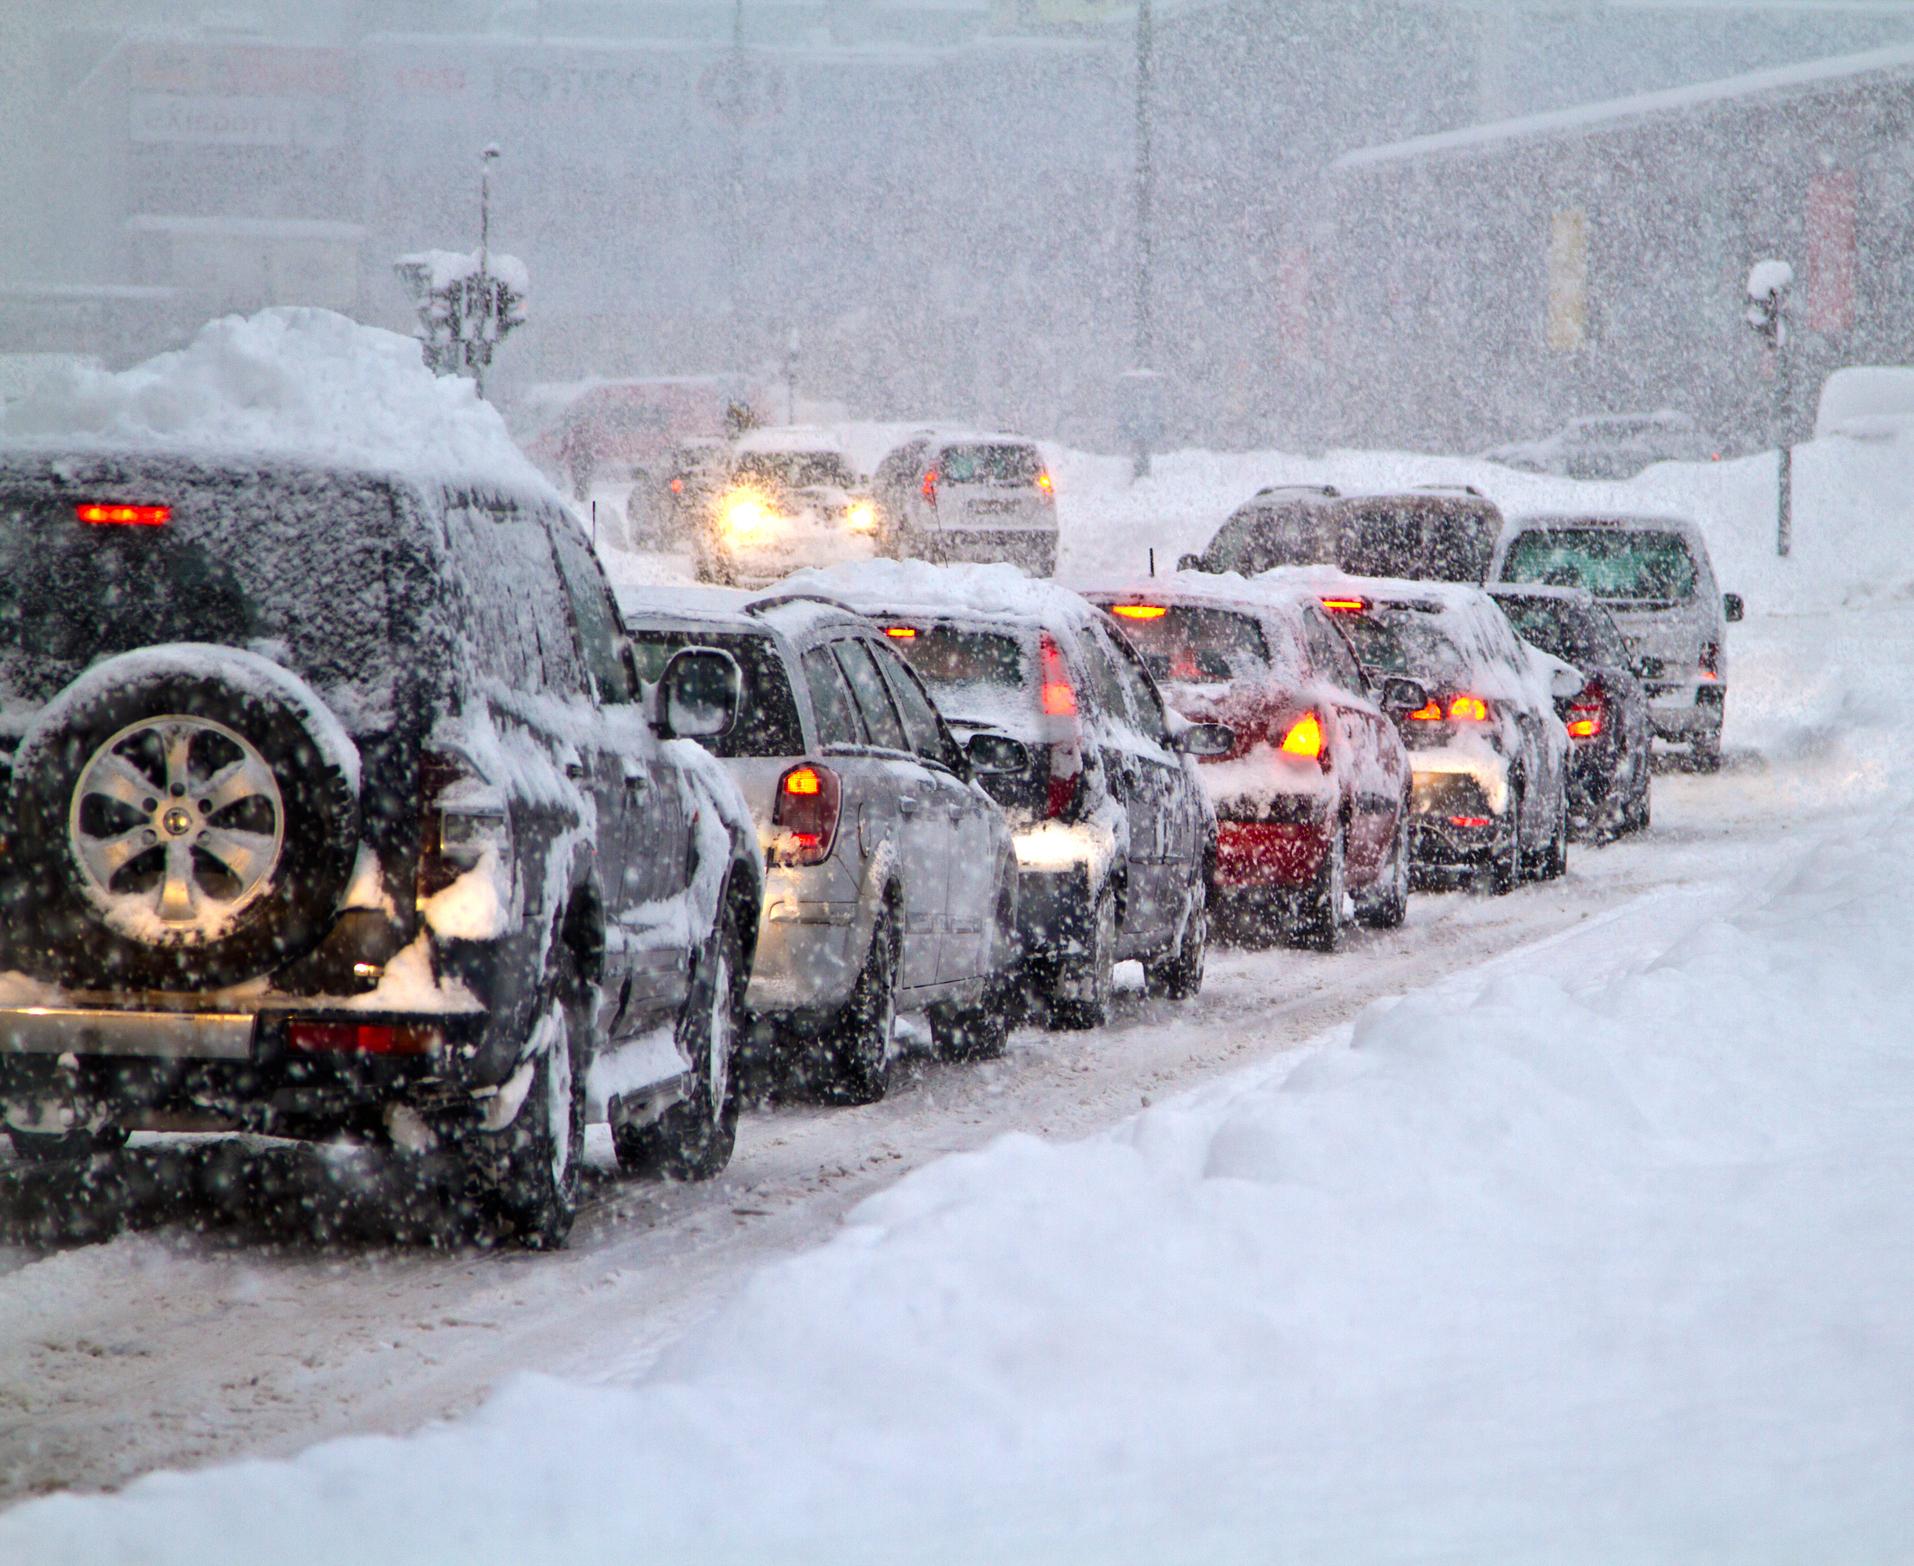 A traffic jam of cars stuck in the snow